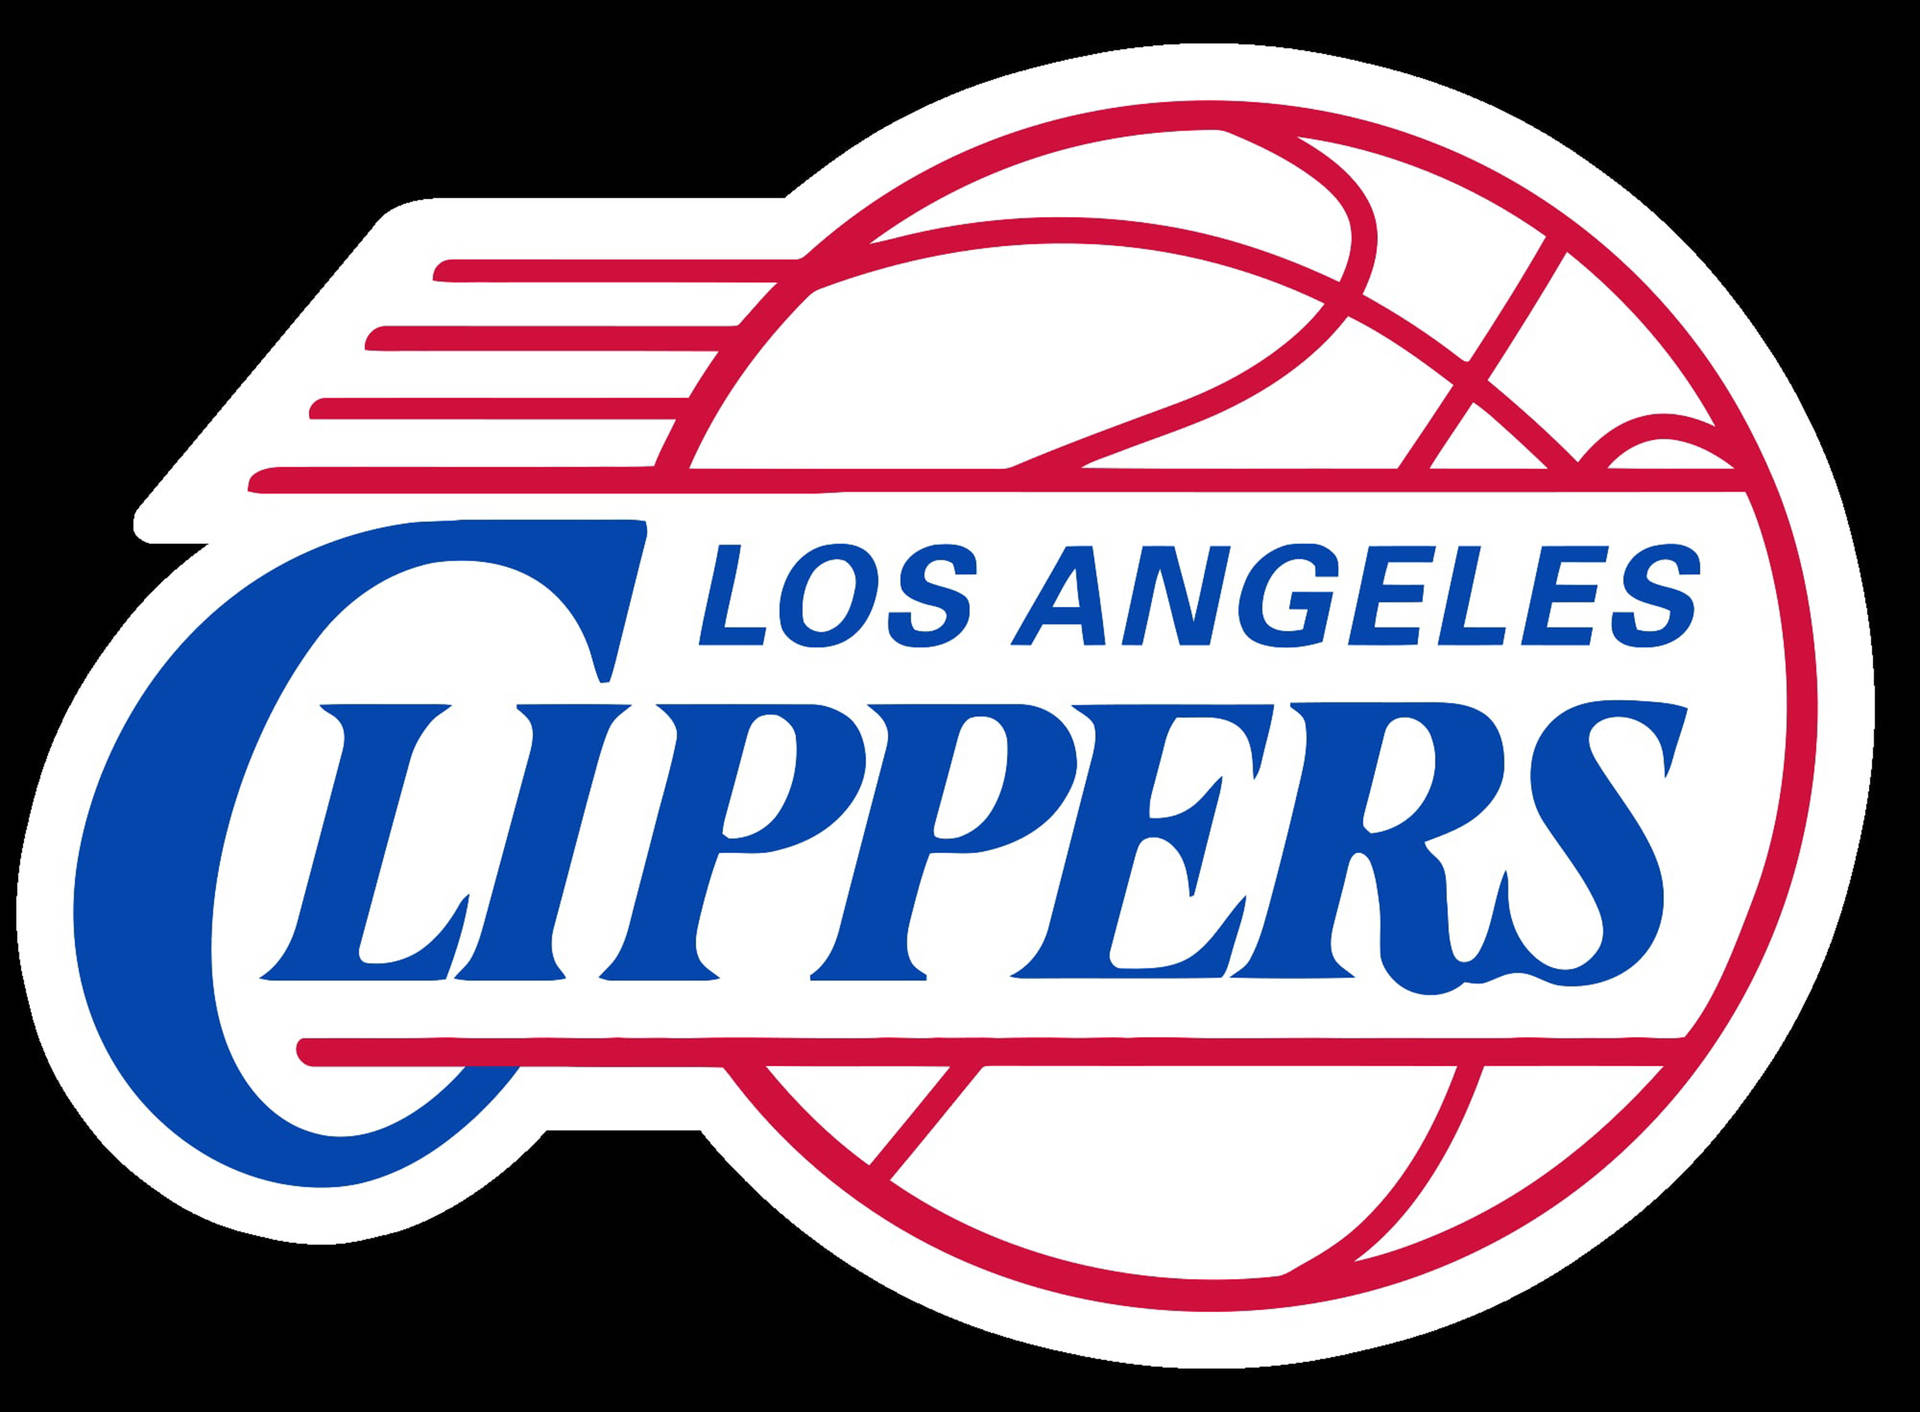 Los Angeles Clippers 2010 Black Background Wallpaper